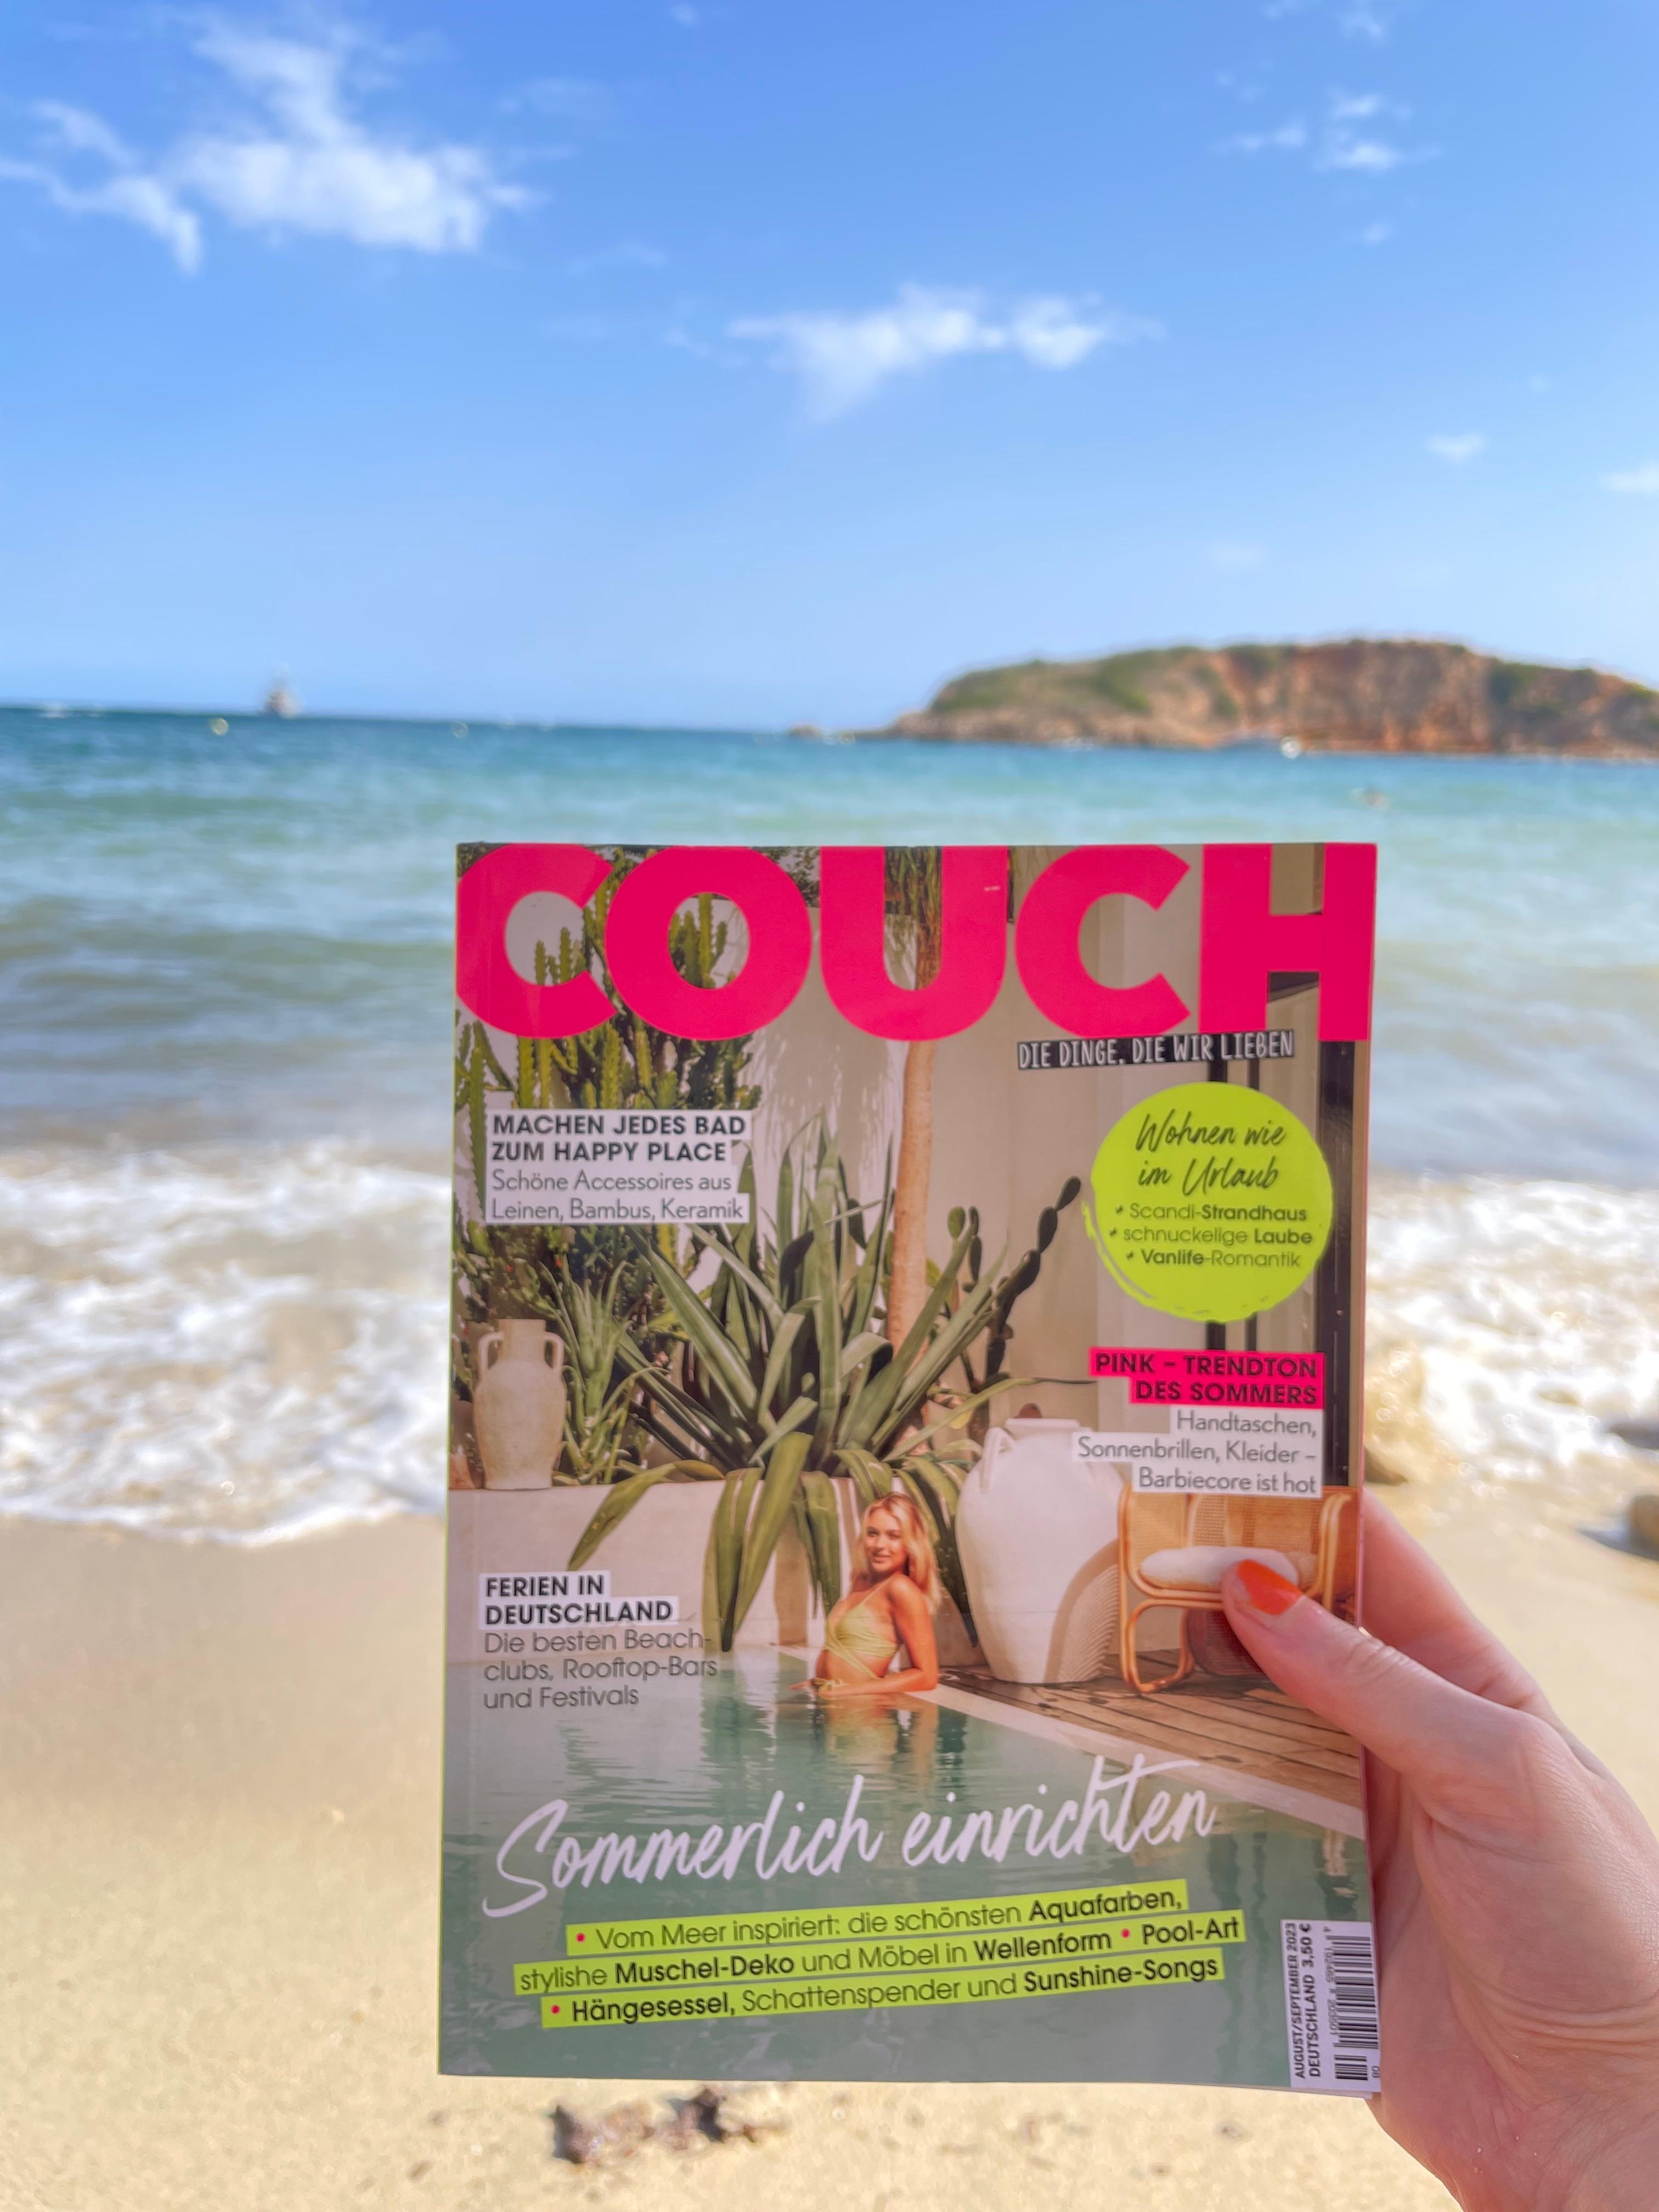 Sommerurlaub ☀️ 
#sommer #holiday #urlaub #couch #couchmagazin #sommerliebling
#summertime #mallorca